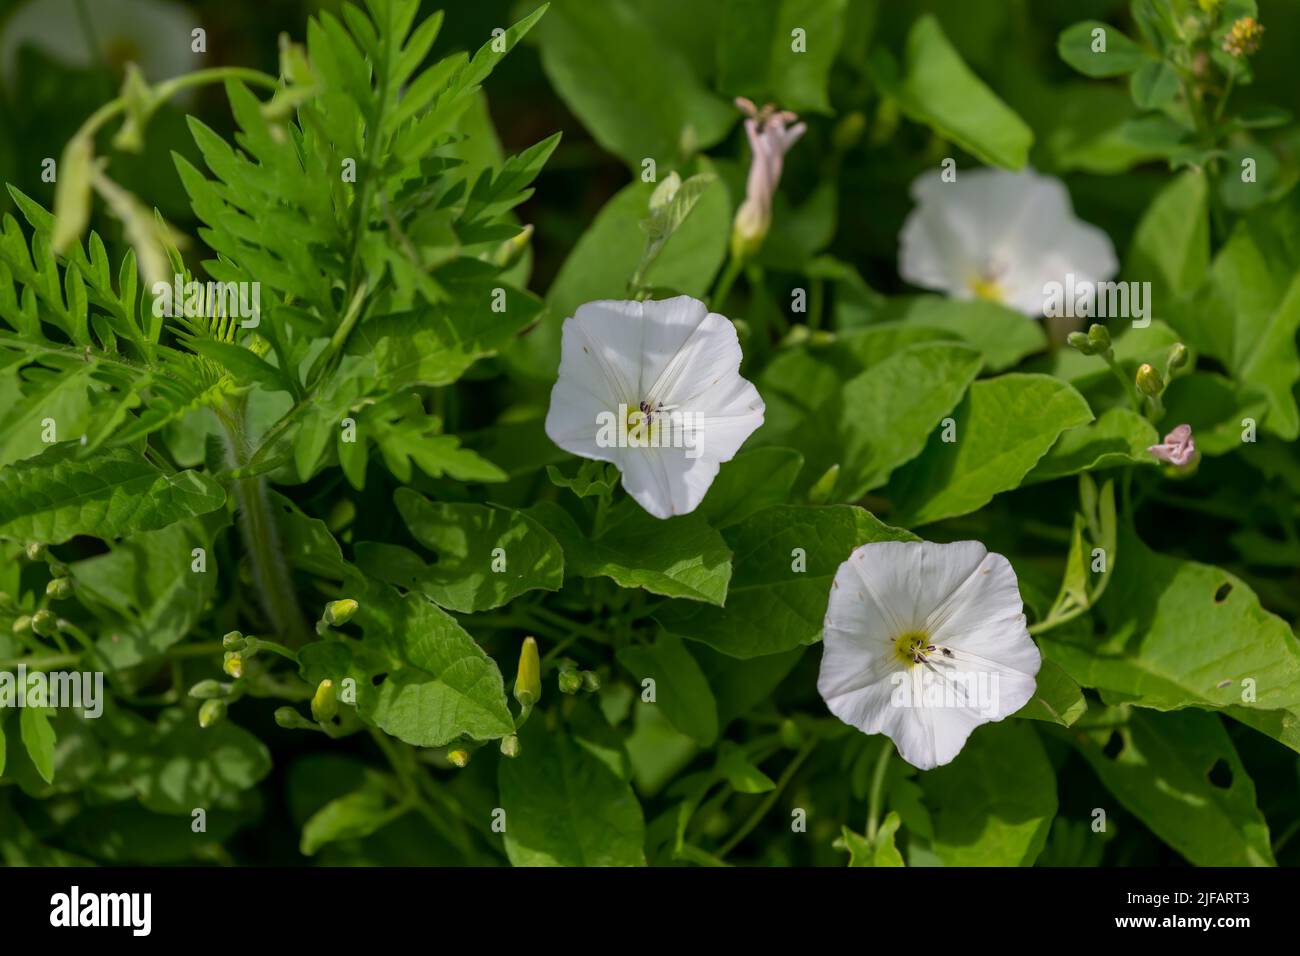 Field bindweed (Convolvulus arvensis),also known as morning glory, European bindweed, or creeping jenny is  broad leaved, perennial plant Stock Photo